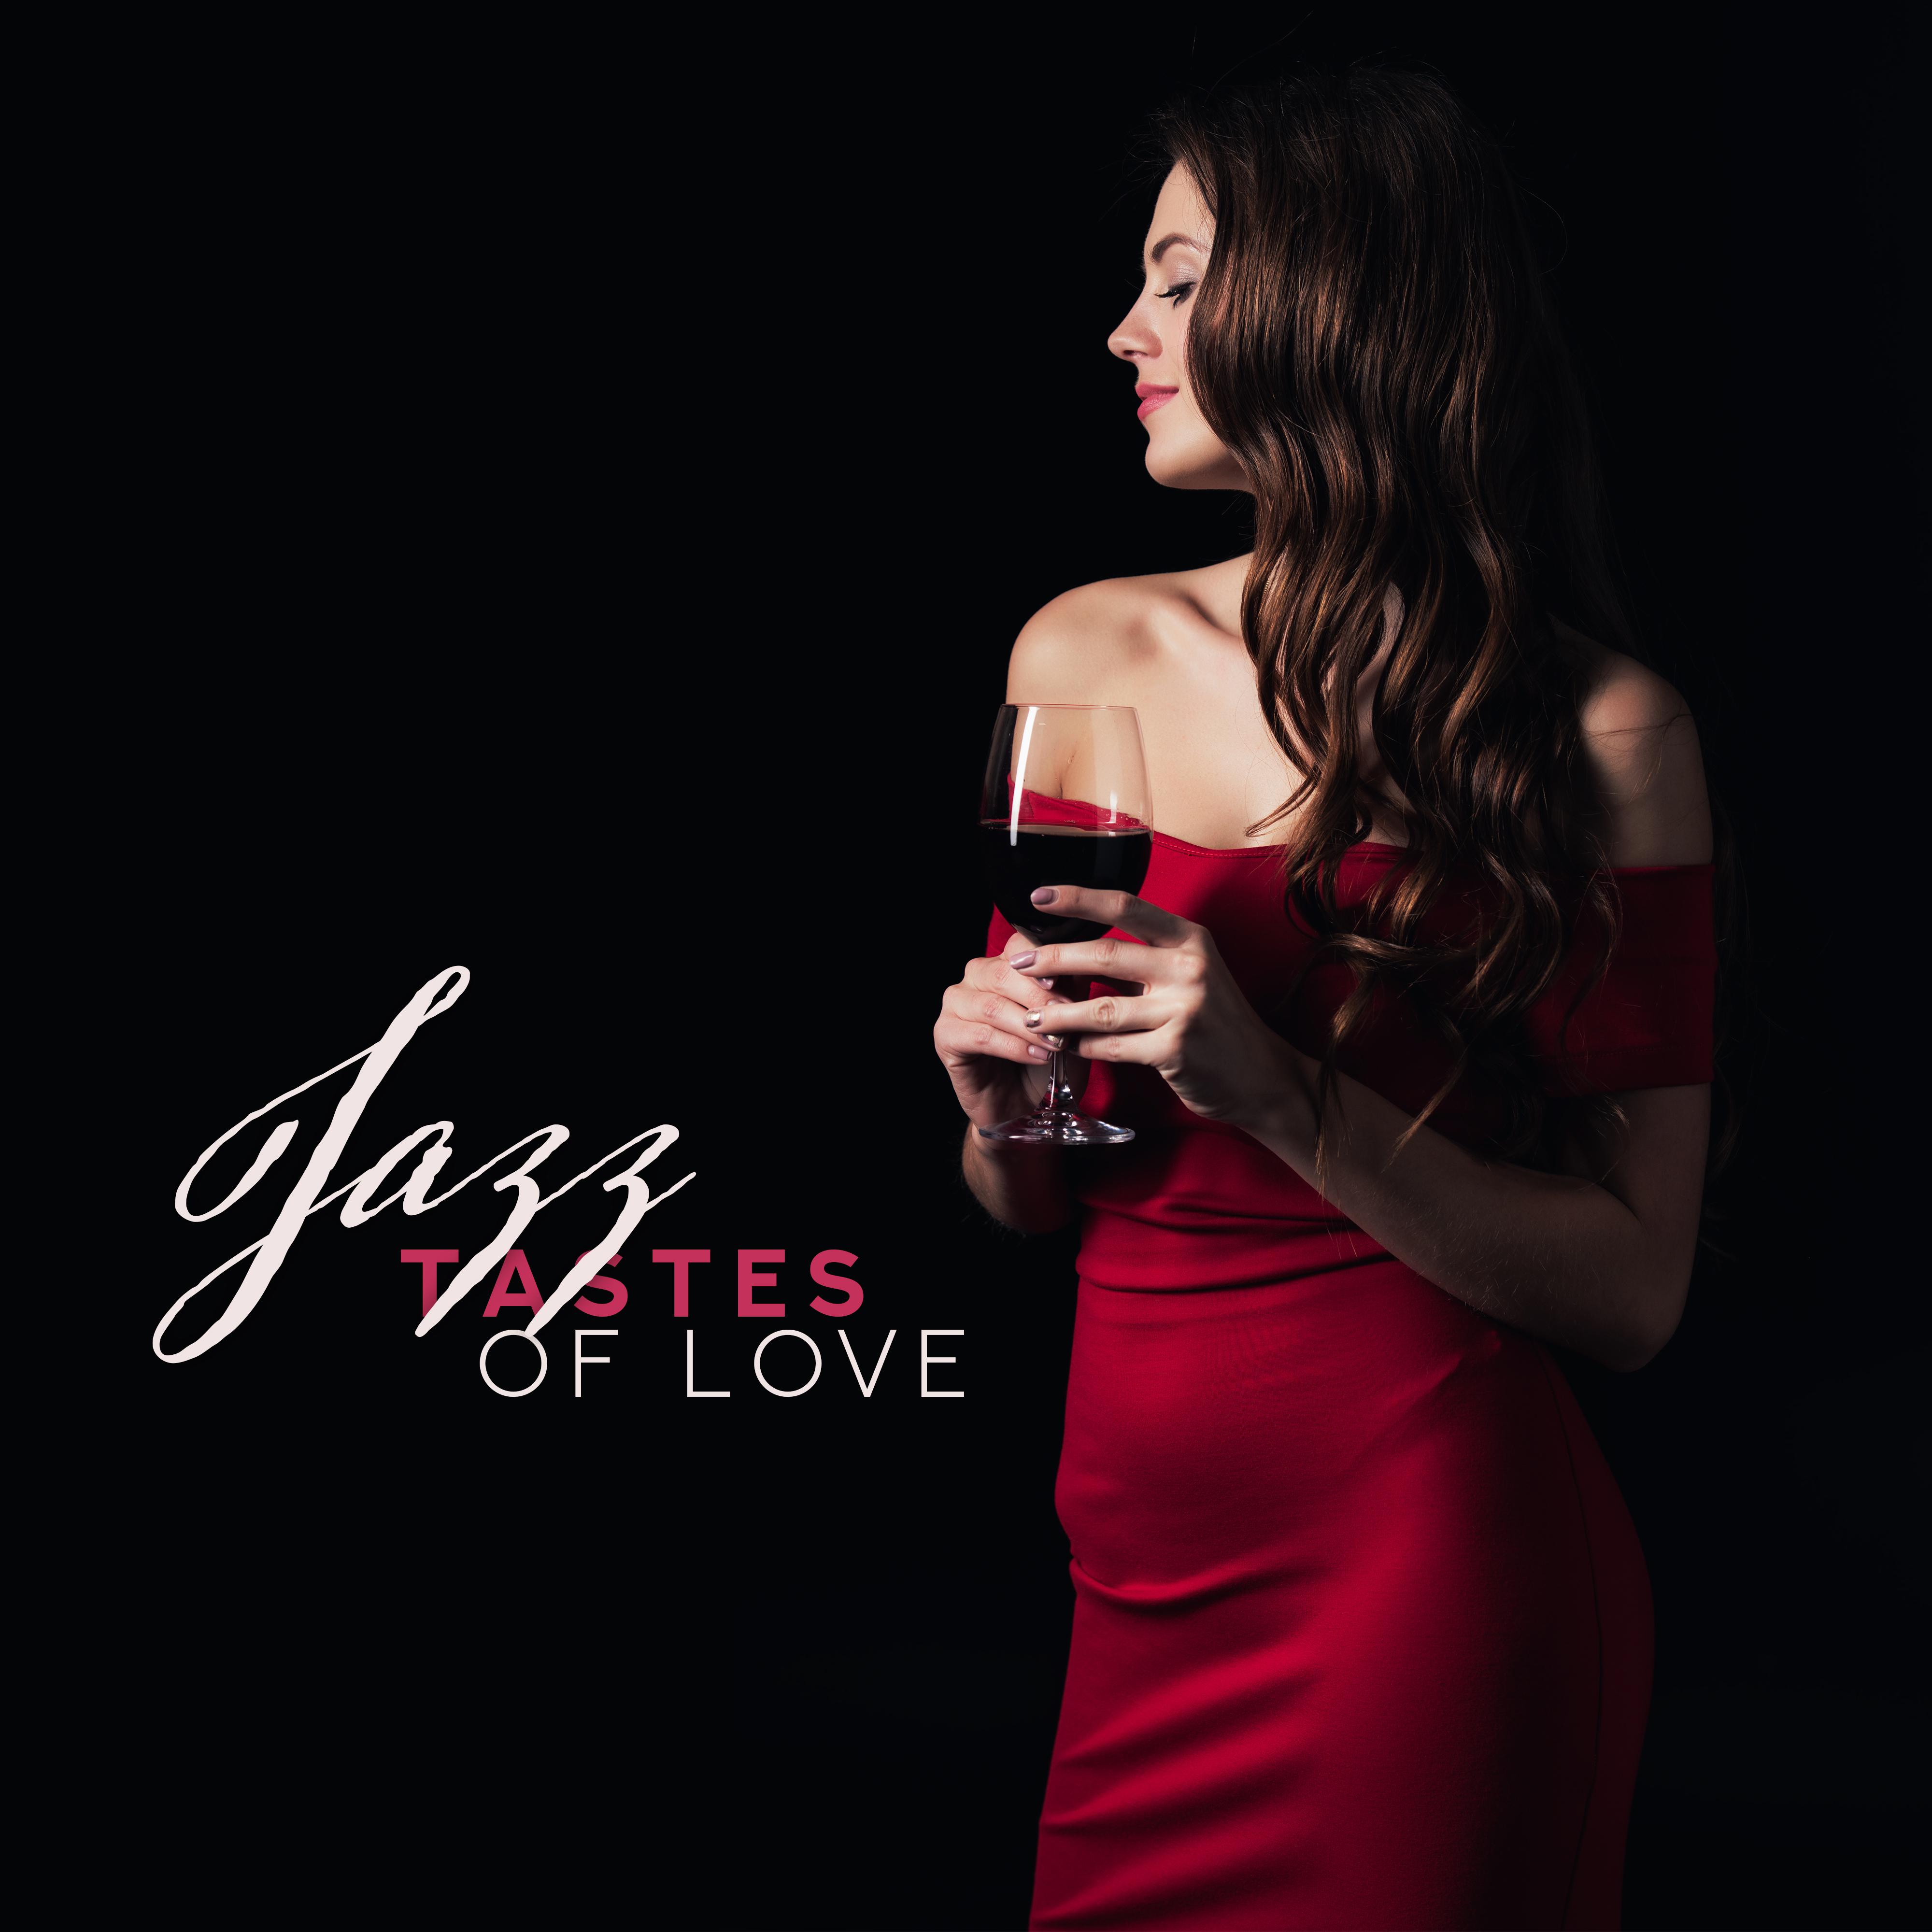 Jazz Tastes of Love: Collection of Very Romantic Smooth Jazz 2019 Music for Couple’s, Background for Spending Perfect Evening Together, Anniversary Dinner Time, Hot Night Full of Sex & Calm Romantic Morning